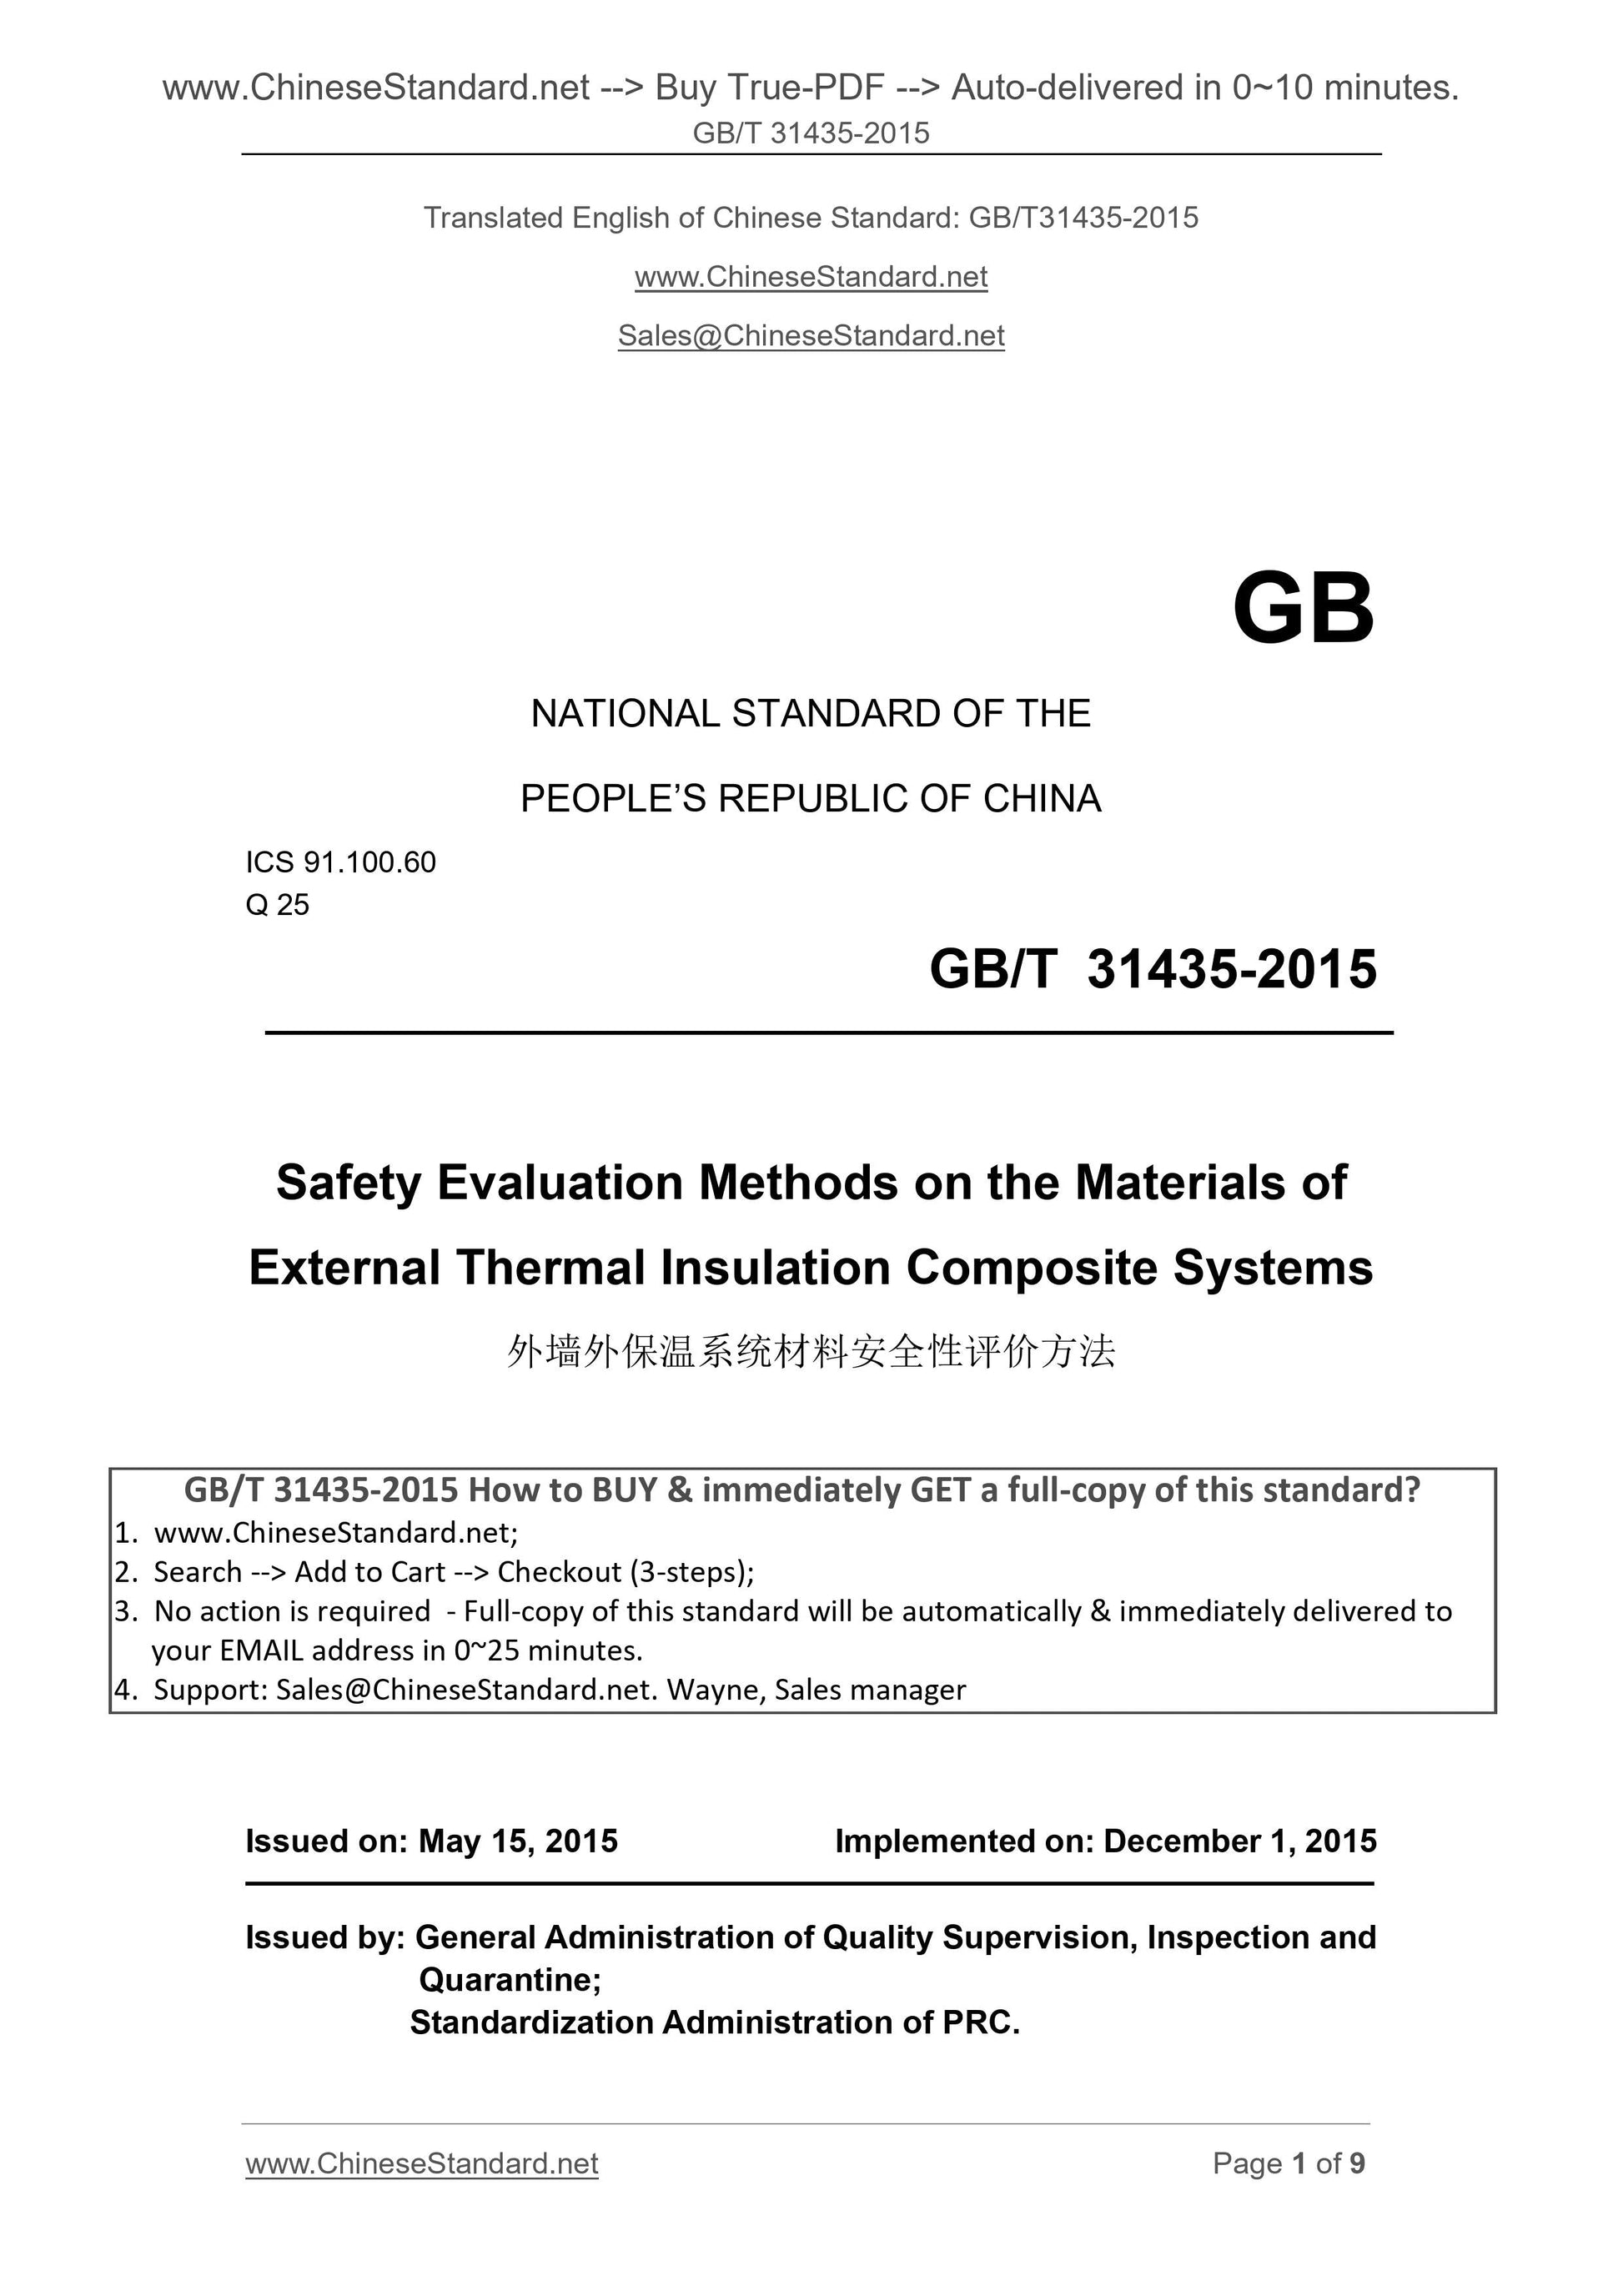 GB/T 31435-2015 Page 1